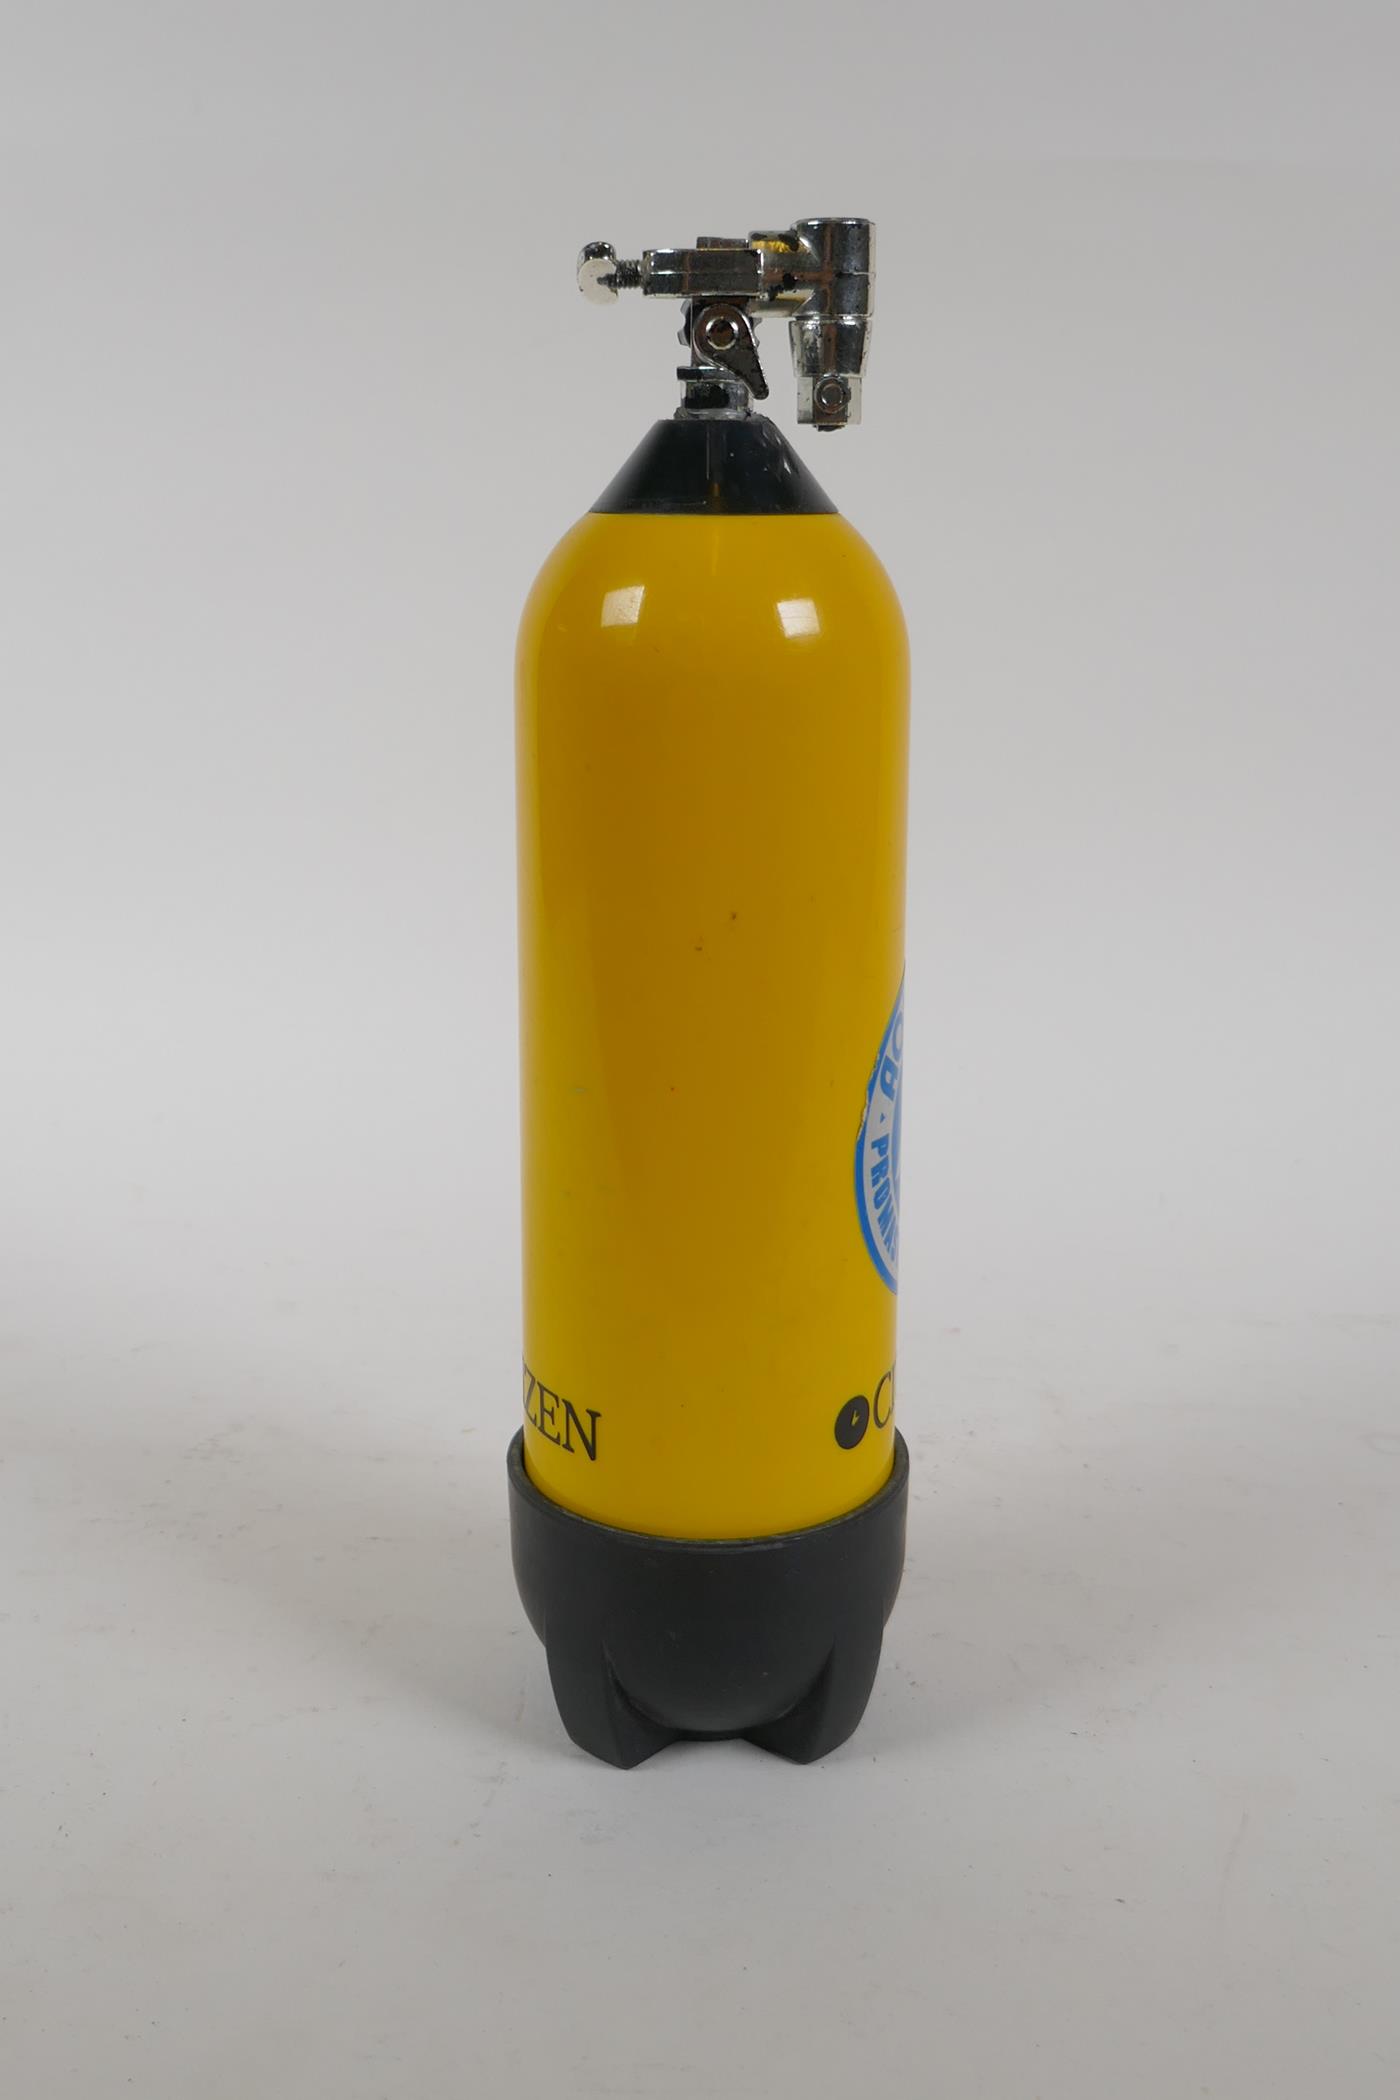 A Citizen Promaster Aqualand watch case in the form of a scuba air tank, 25cm high - Image 4 of 5